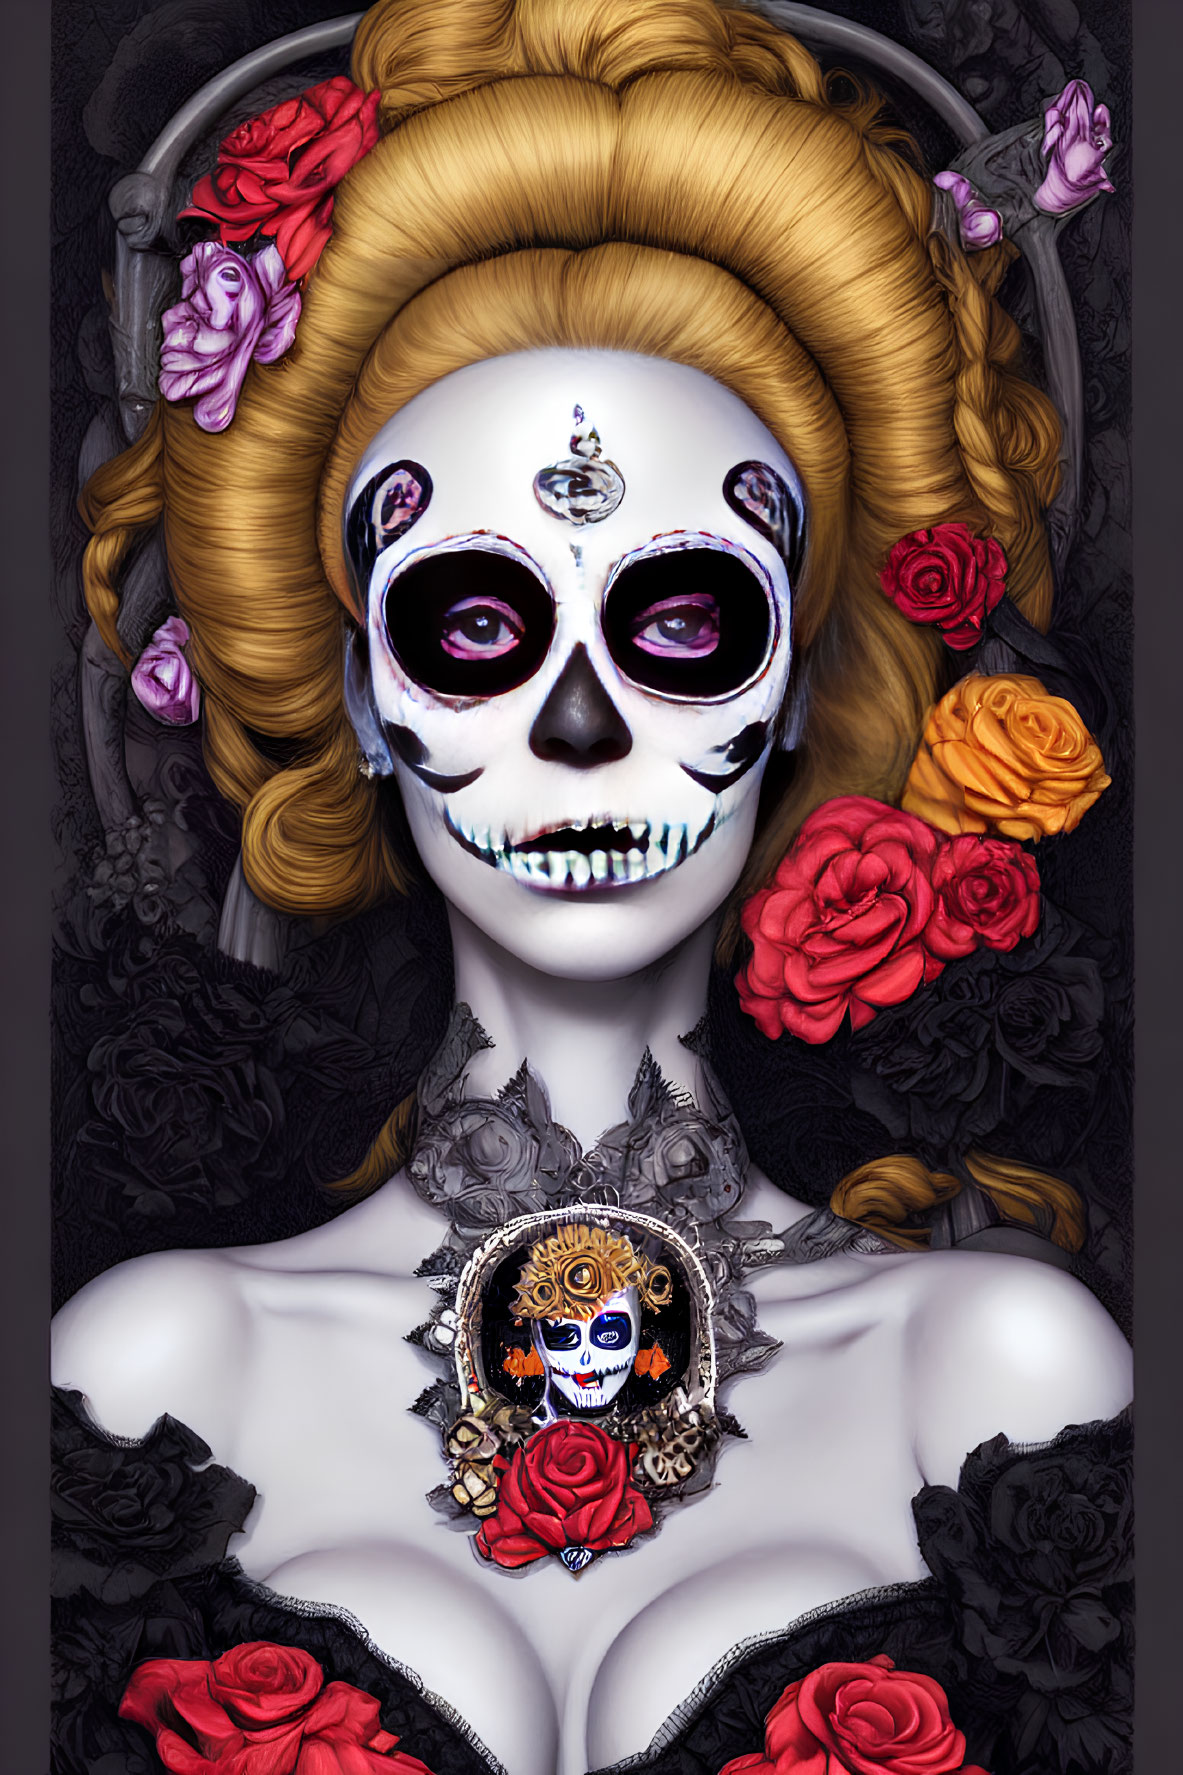 Skeleton-faced figure with beehive hairstyle and roses in dark attire.